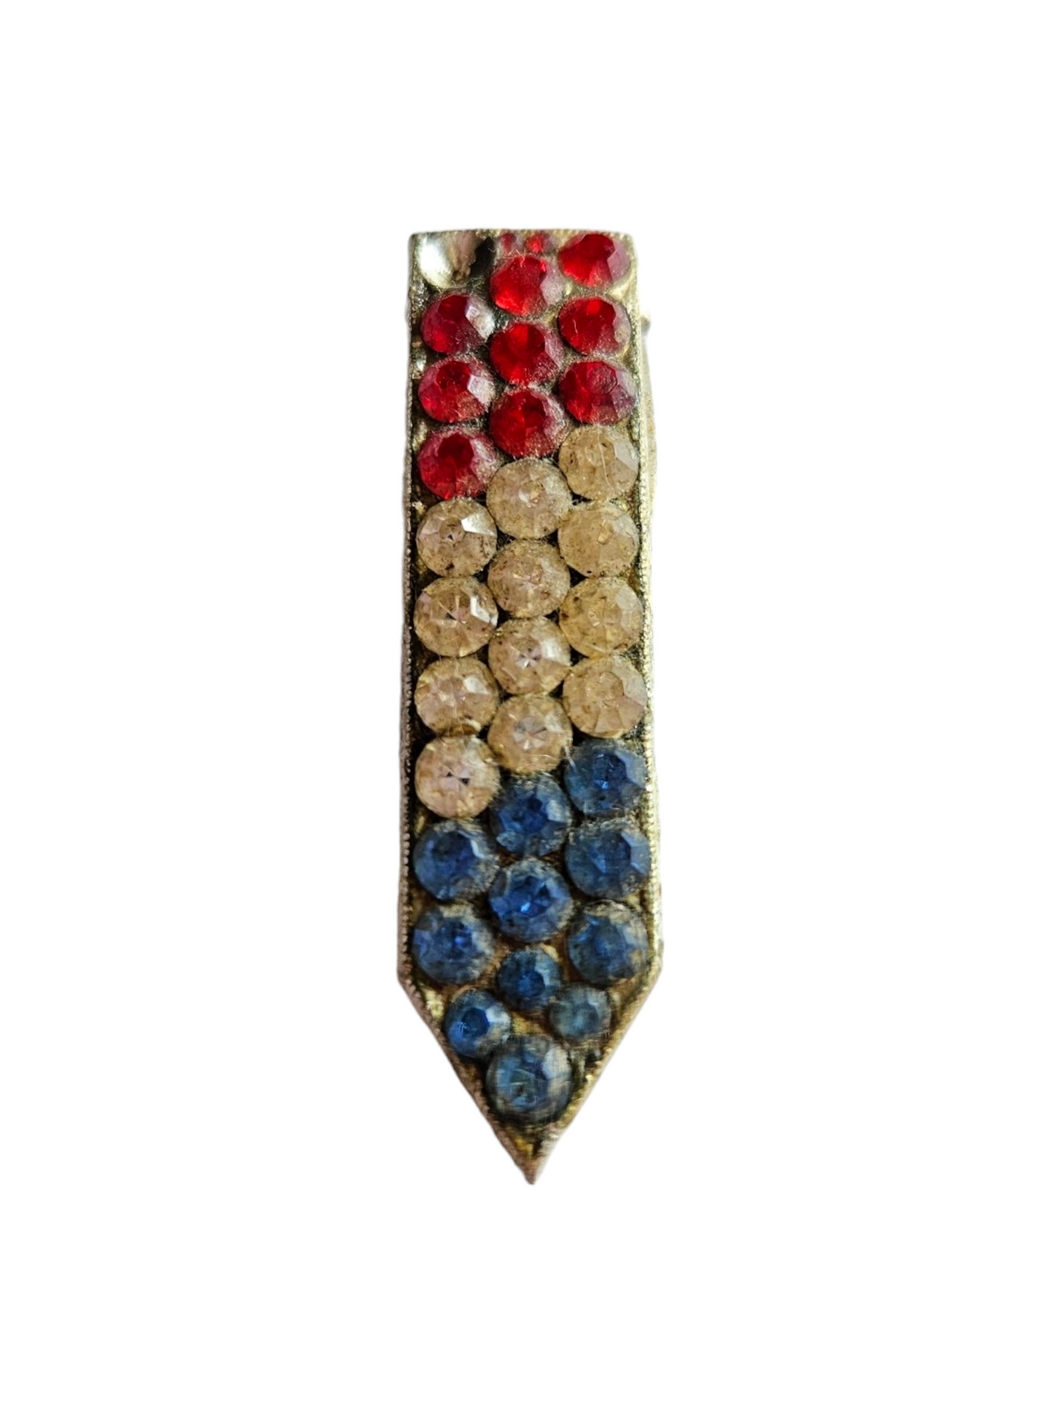 1940s Red, White and Blue Rhinestone Dress Clip